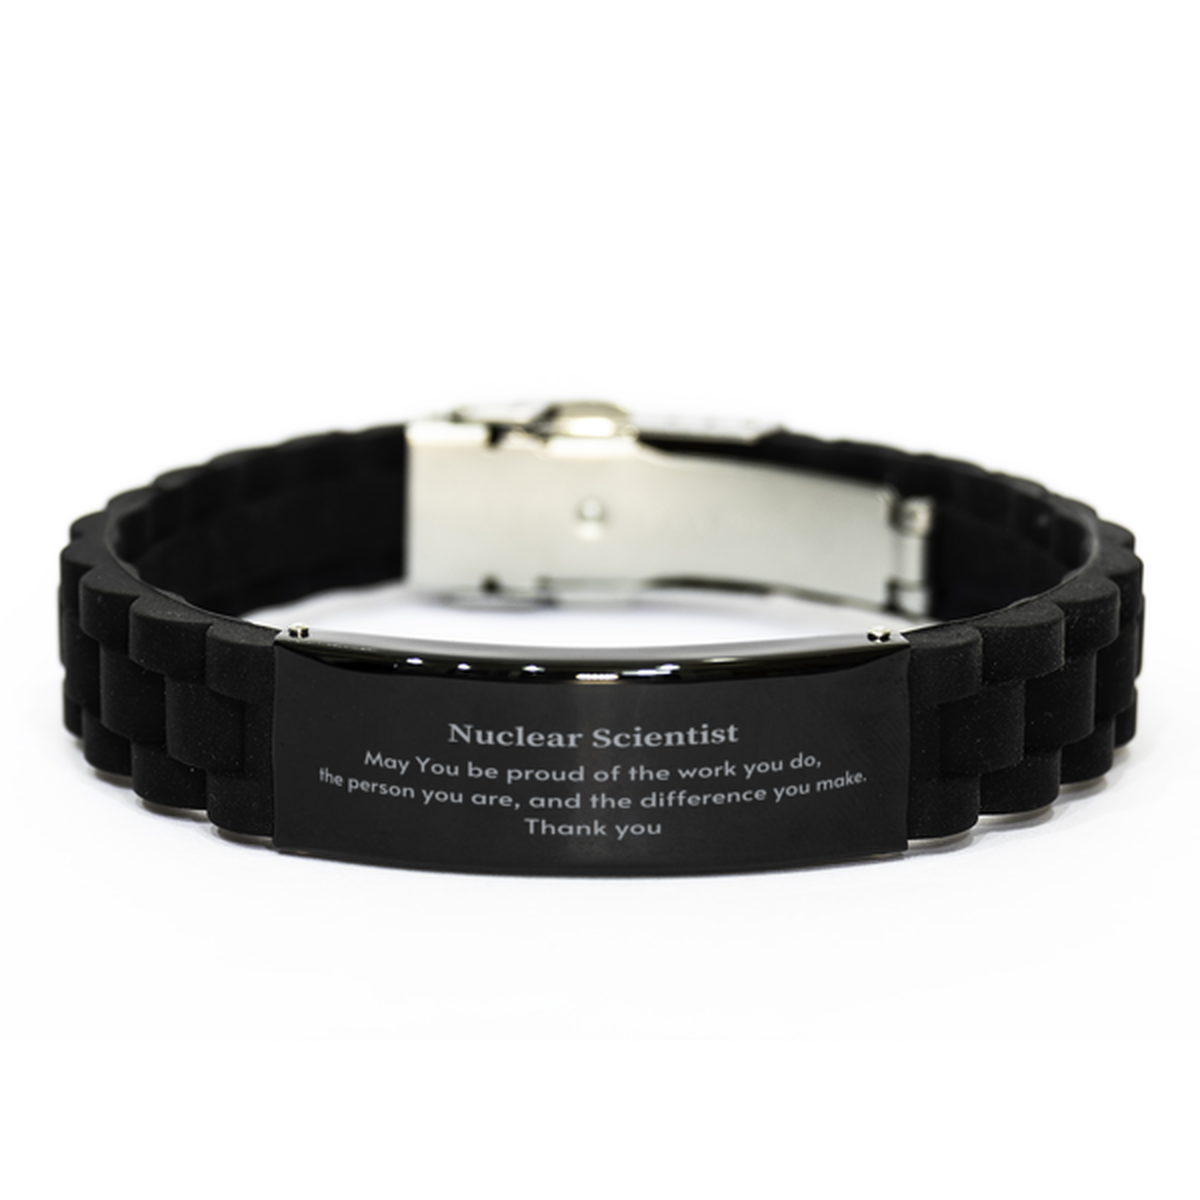 Heartwarming Black Glidelock Clasp Bracelet Retirement Coworkers Gifts for Nuclear Scientist, Nuclear Scientist May You be proud of the work you do, the person you are Gifts for Boss Men Women Friends